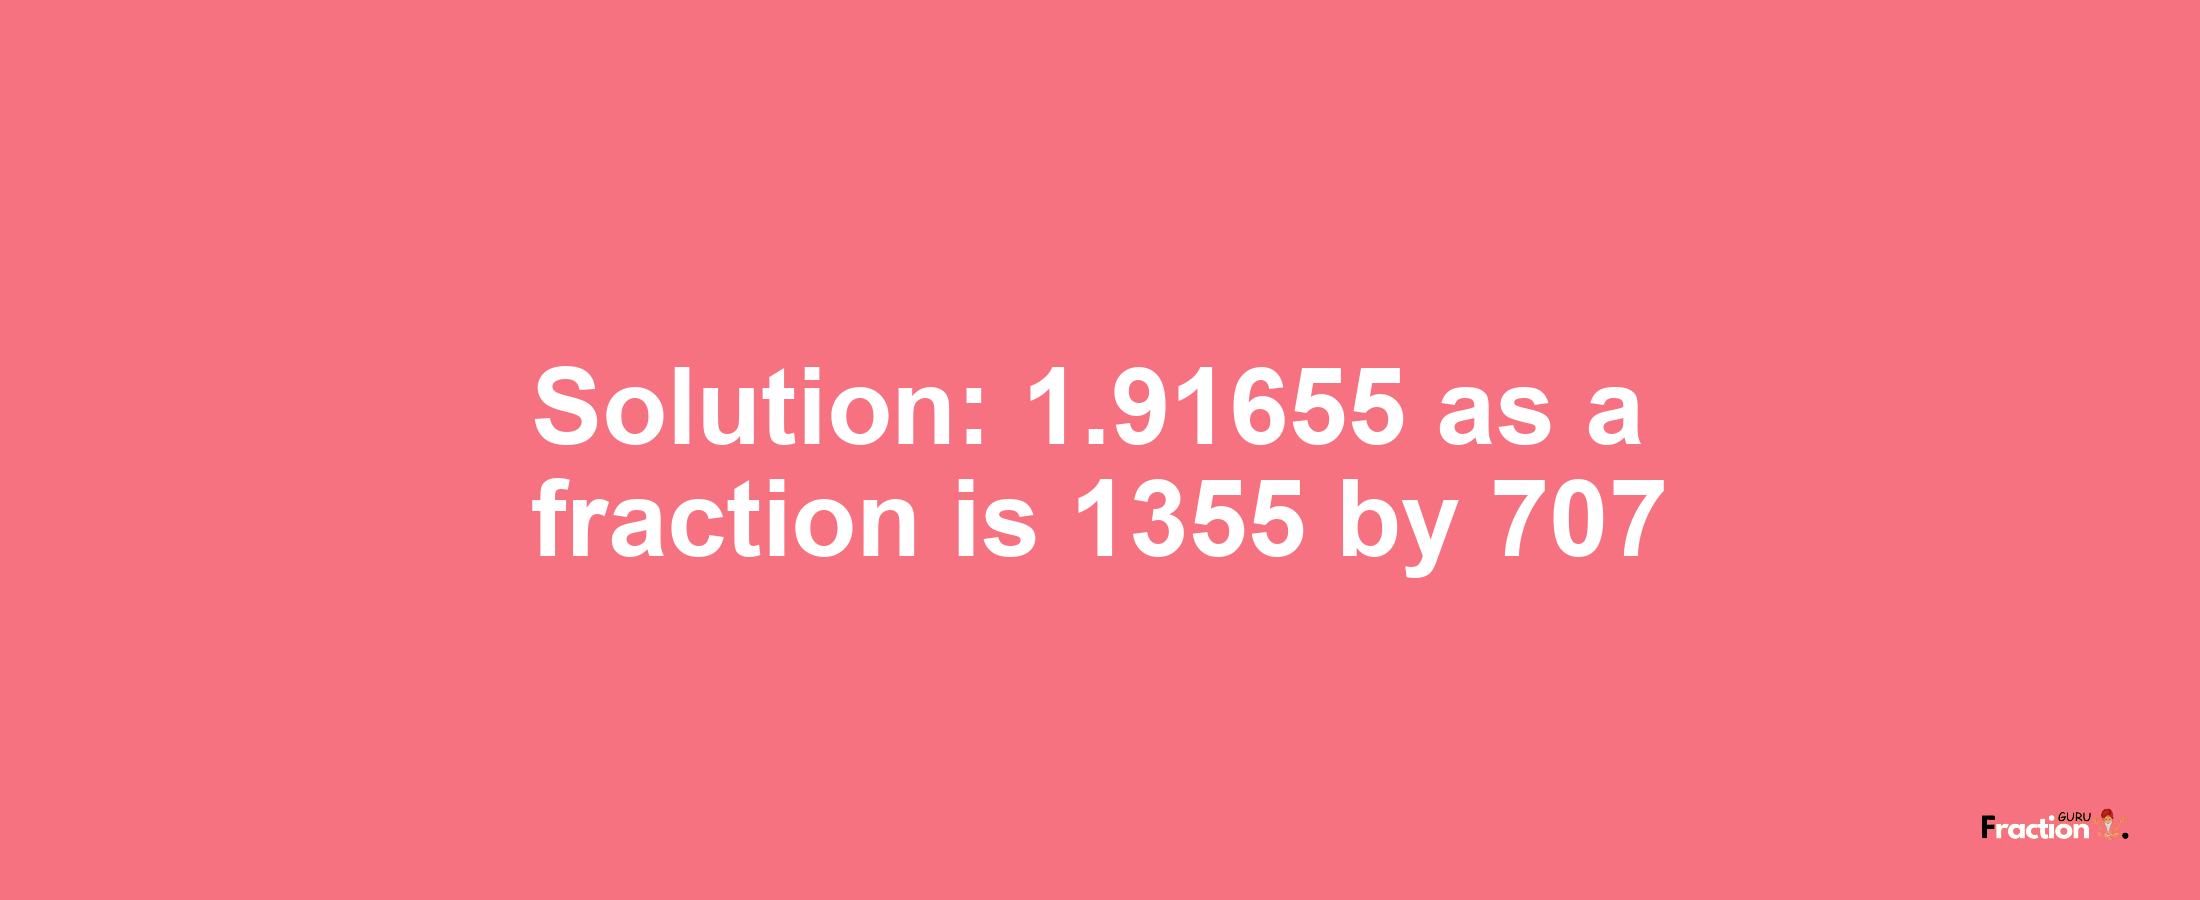 Solution:1.91655 as a fraction is 1355/707